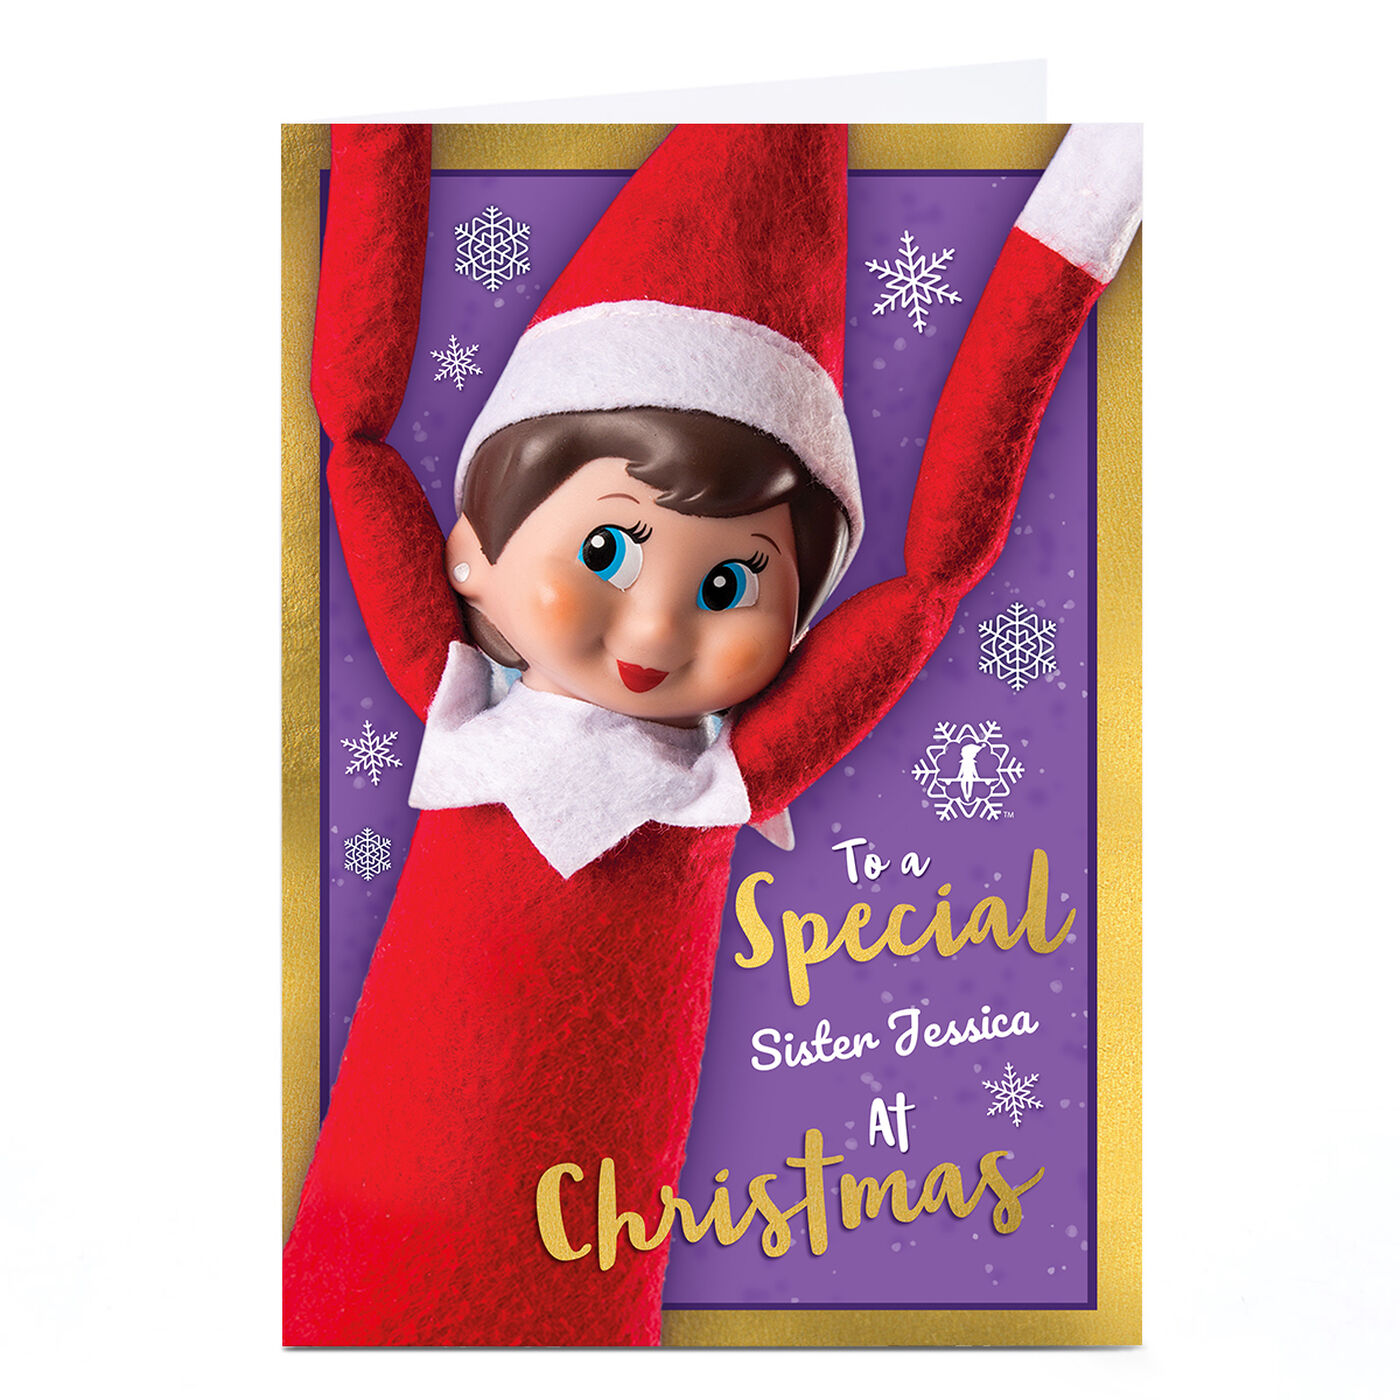 buy-personalised-elf-on-the-shelf-christmas-card-sister-for-gbp-2-29